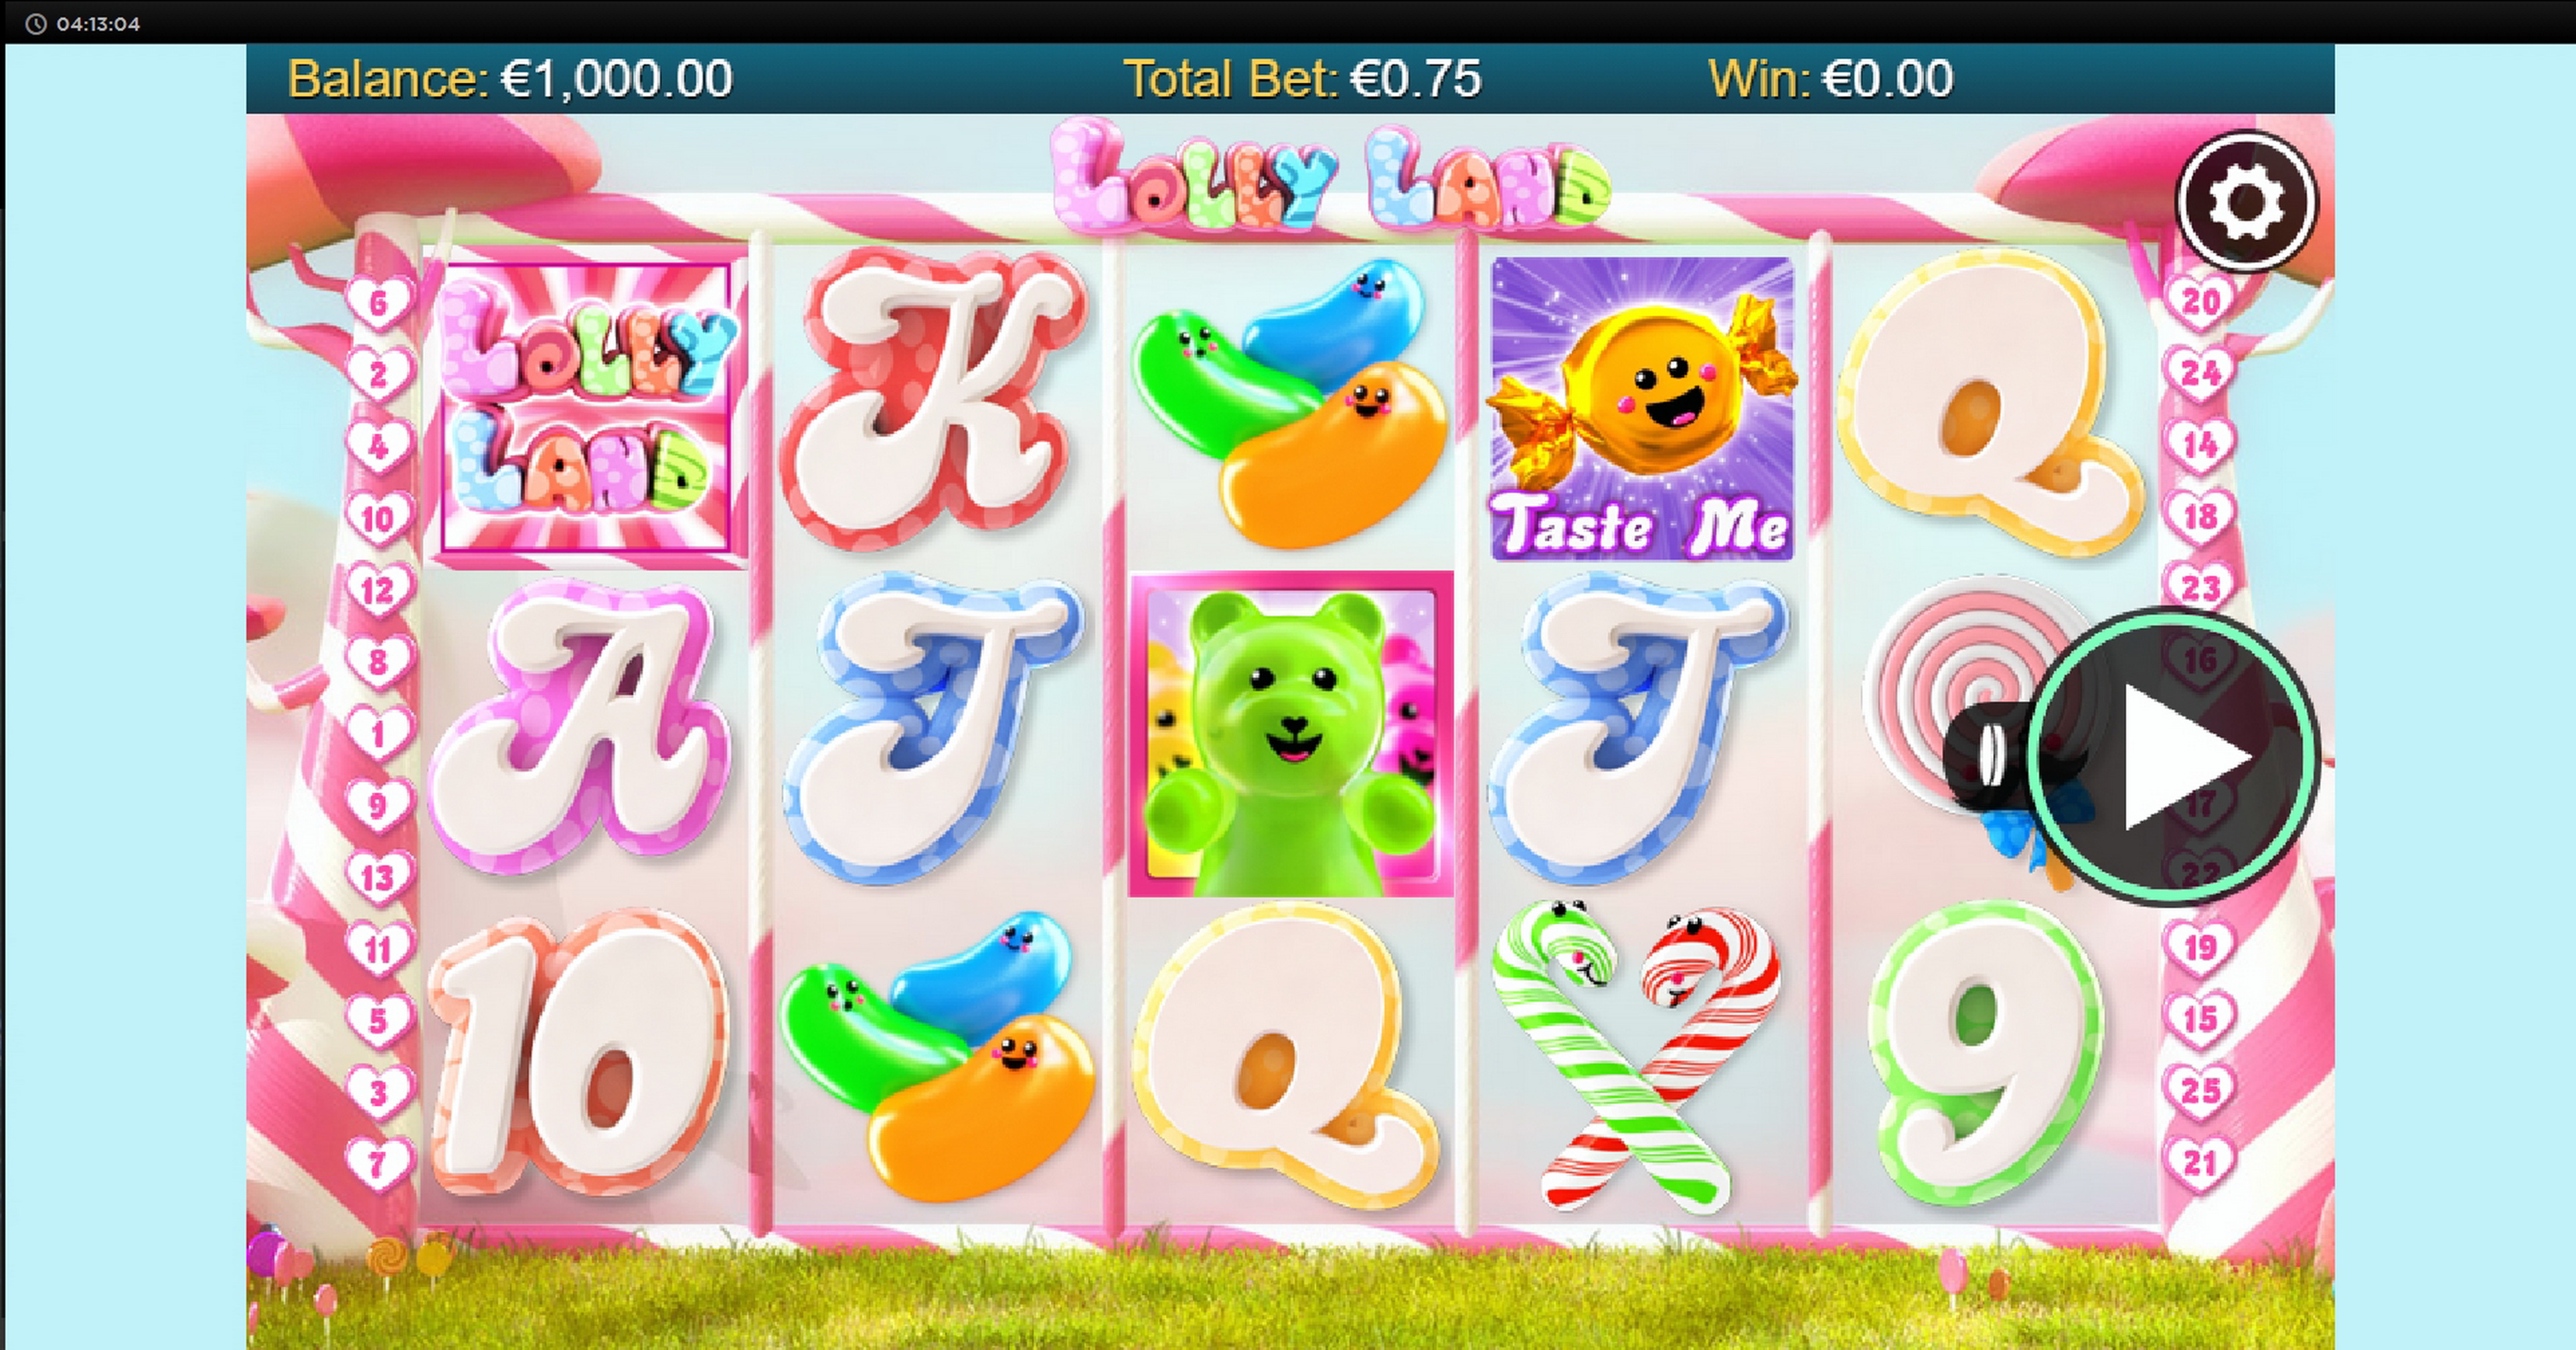 Reels in Lolly Land Slot Game by Chance Interactive